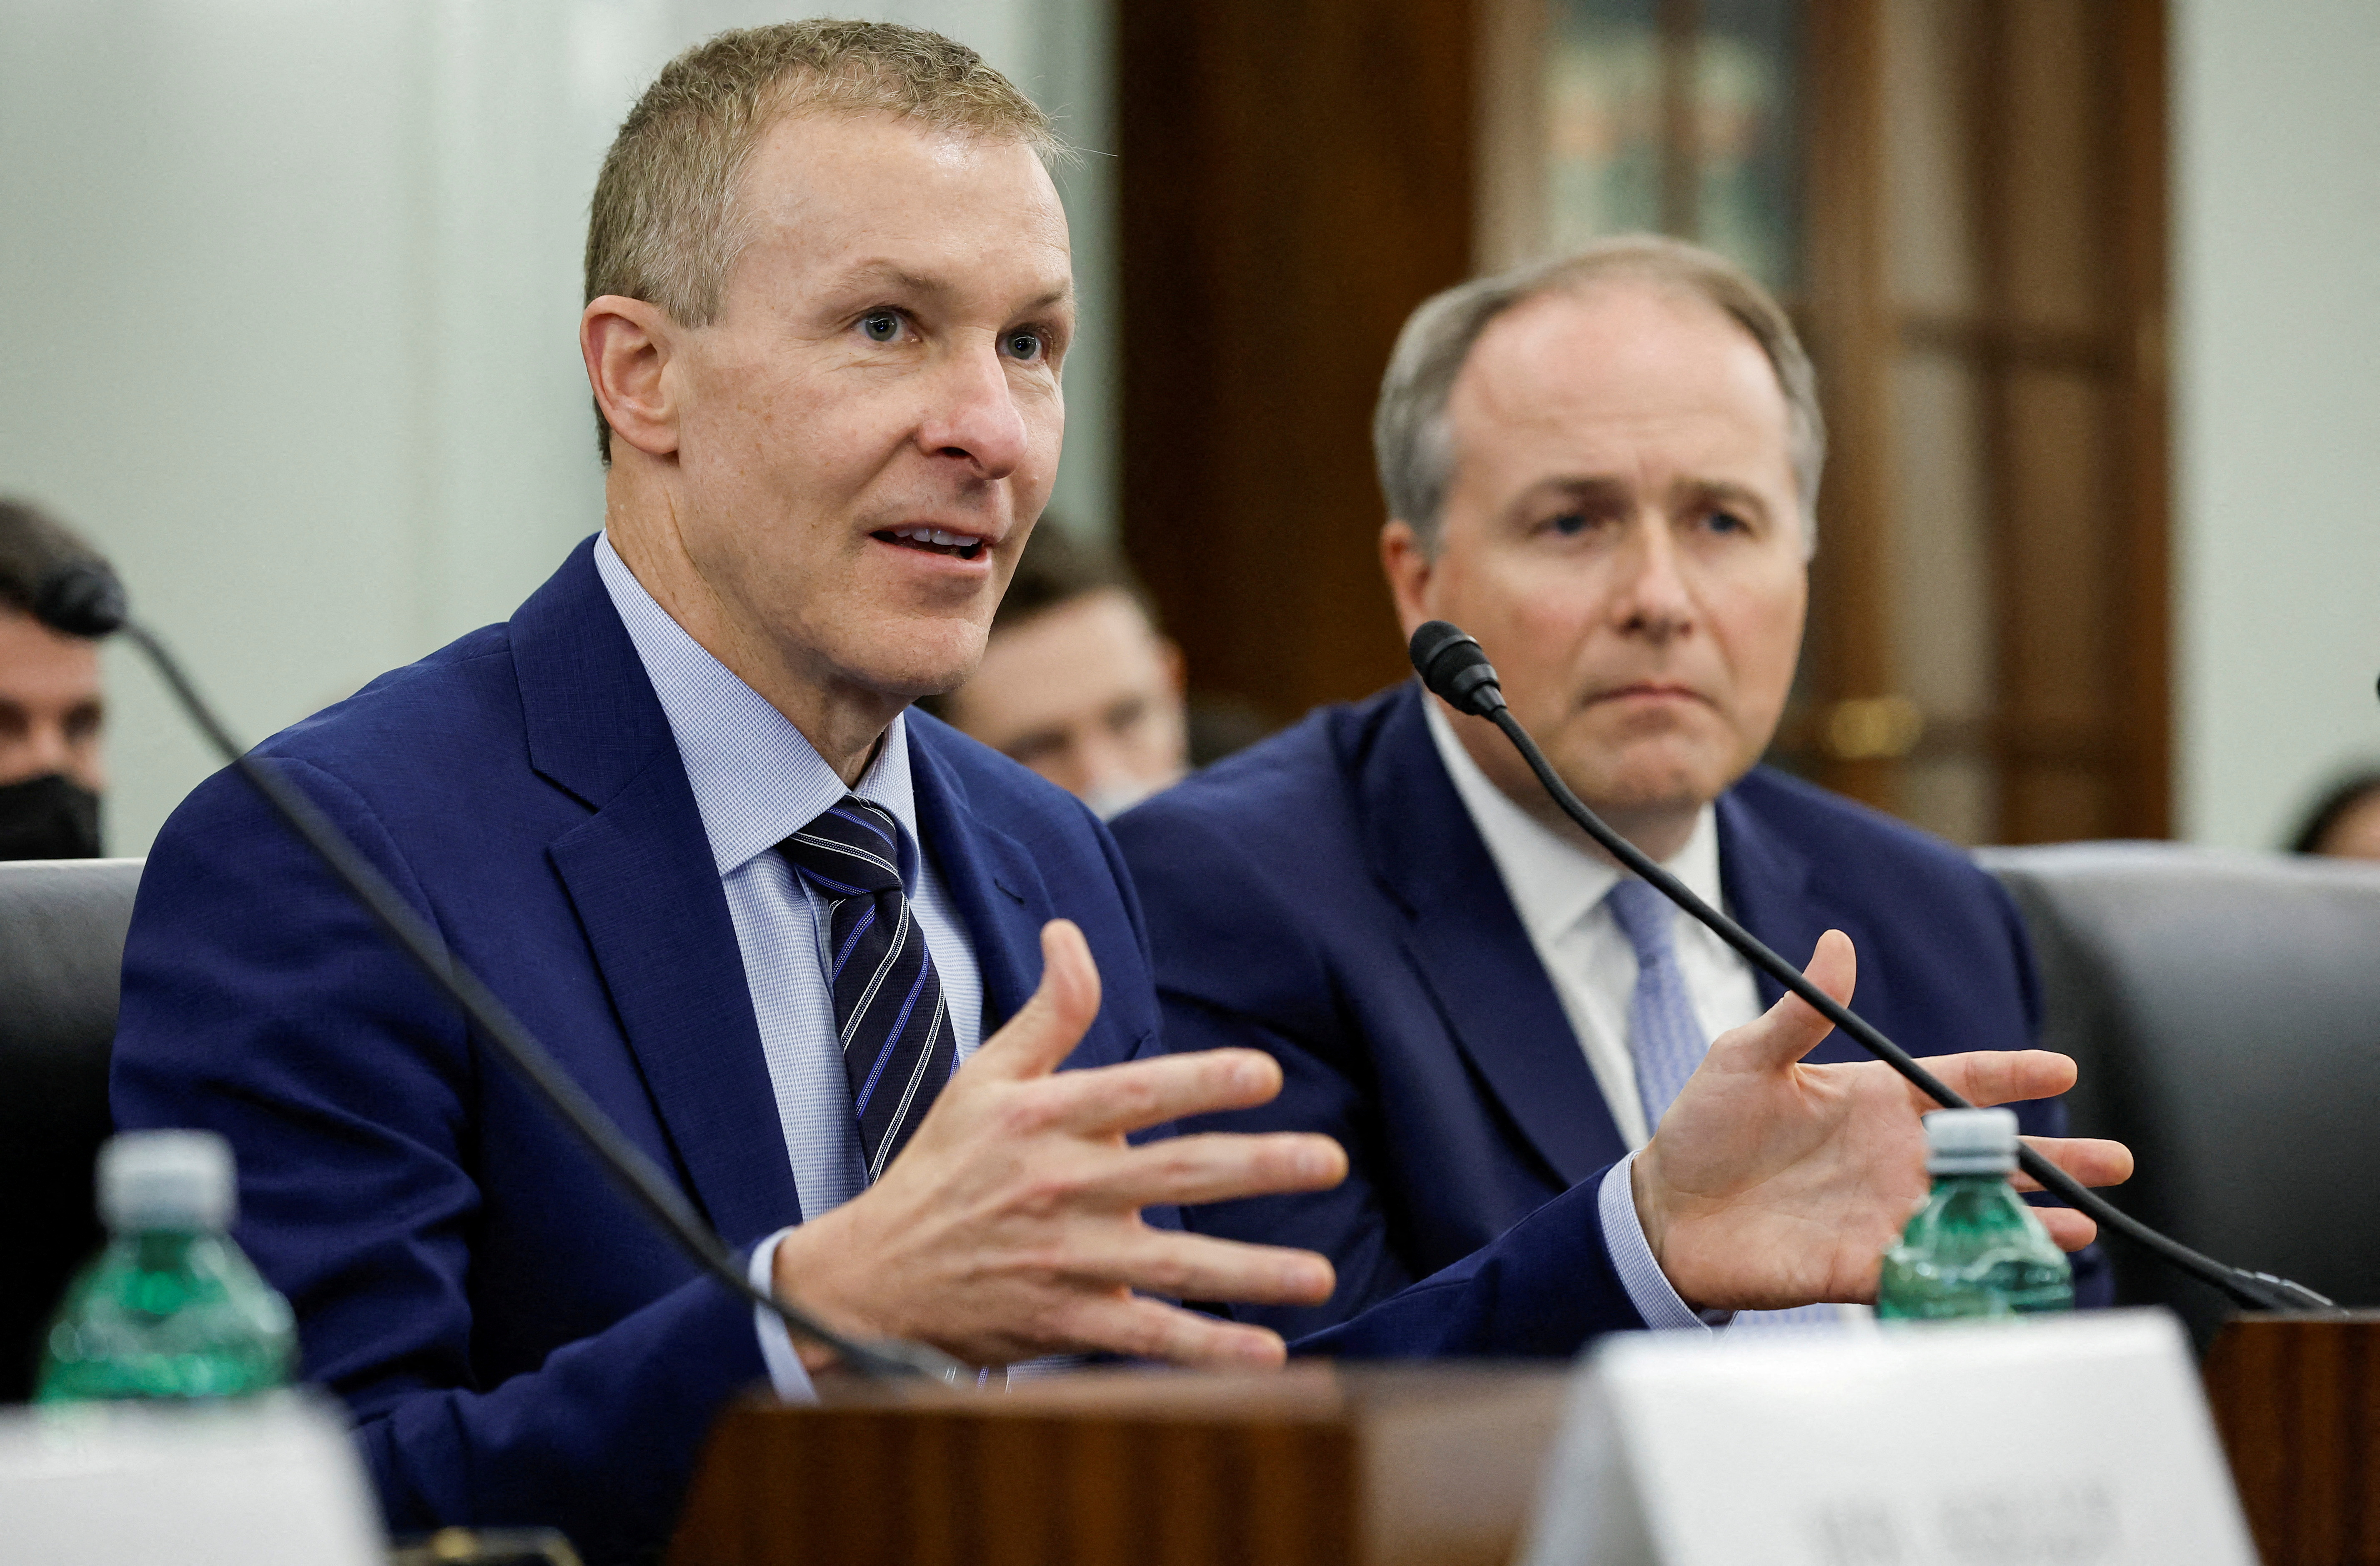 United Airlines CEO Scott Kirby and Delta Air Lines Executive Vice President John Laughter testify before the Senate Commerce, Science, and Transportation Committee in the Russell Senate Office Building on Capitol Hill, in Washington, U.S., December 15, 2021 Chip Somodevilla/Pool via REUTERS